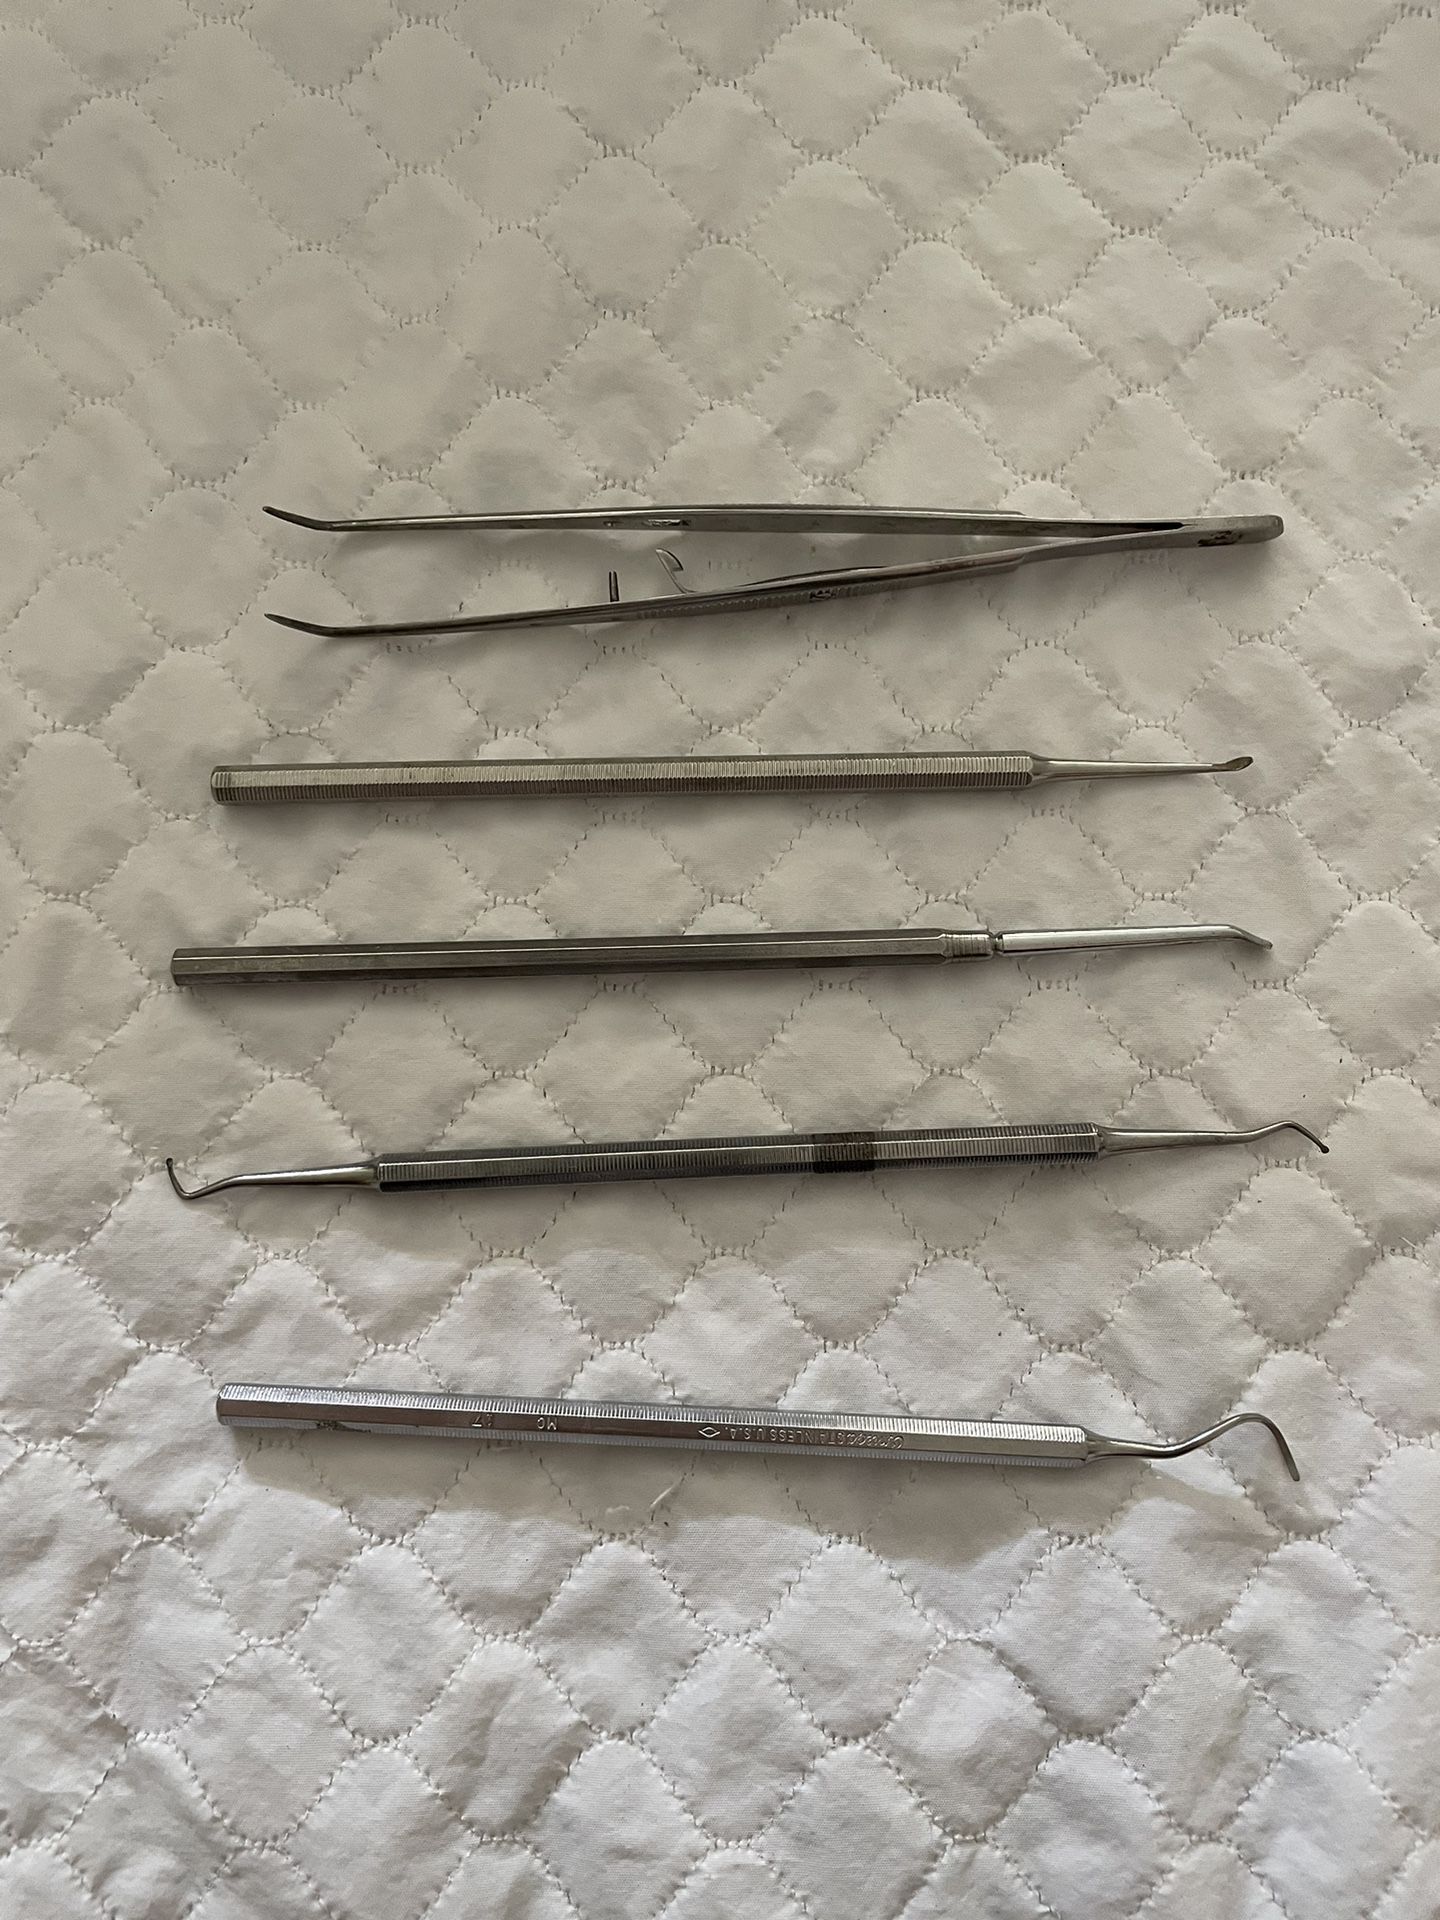 Vintage Stainless Steel Tools For Sculpture/ceramics - Lot Of 5 